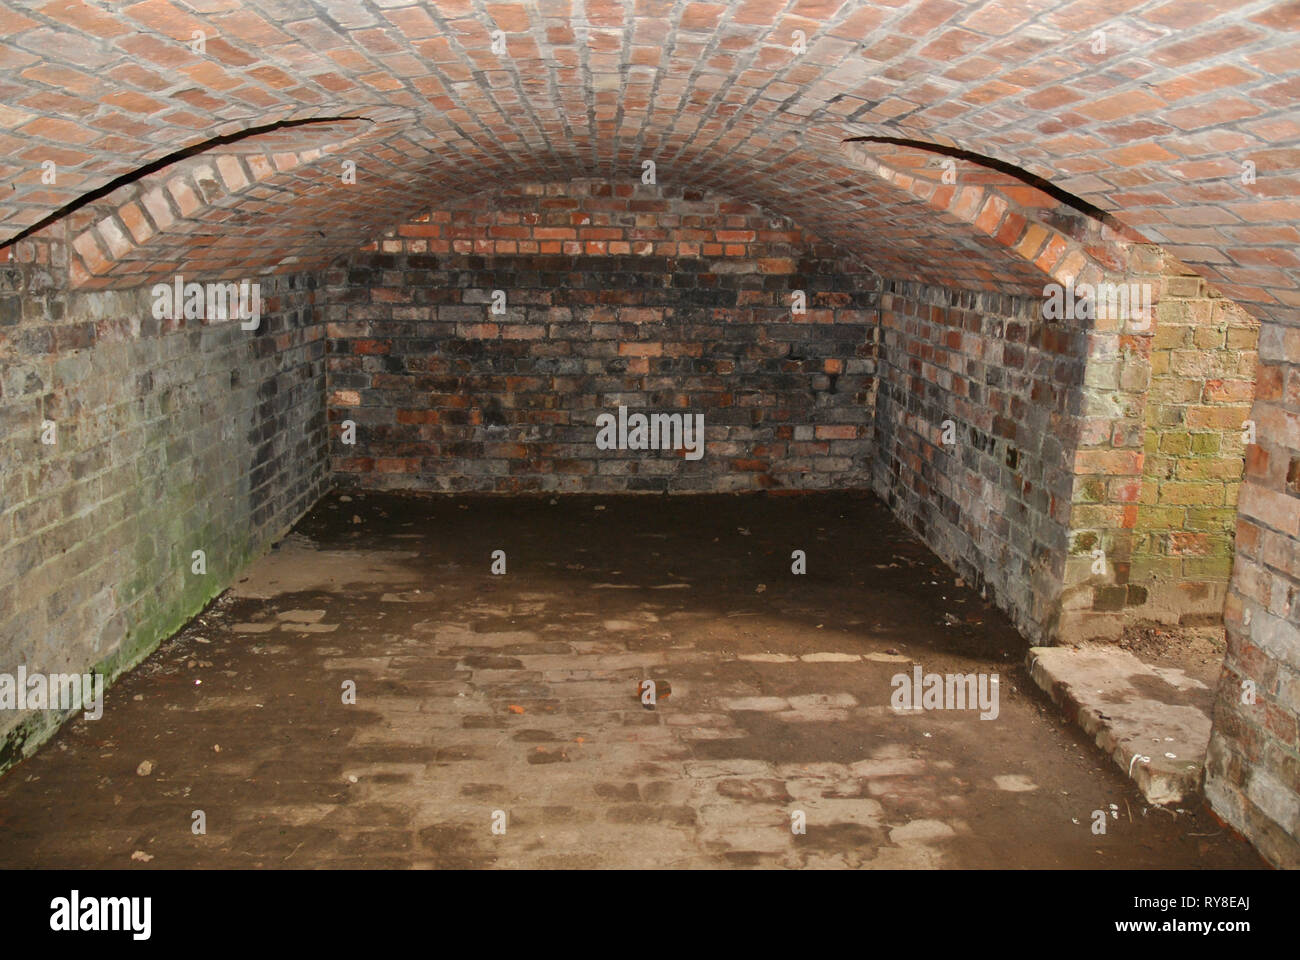 An old underground cellar with a brick built arched roof Stock Photo